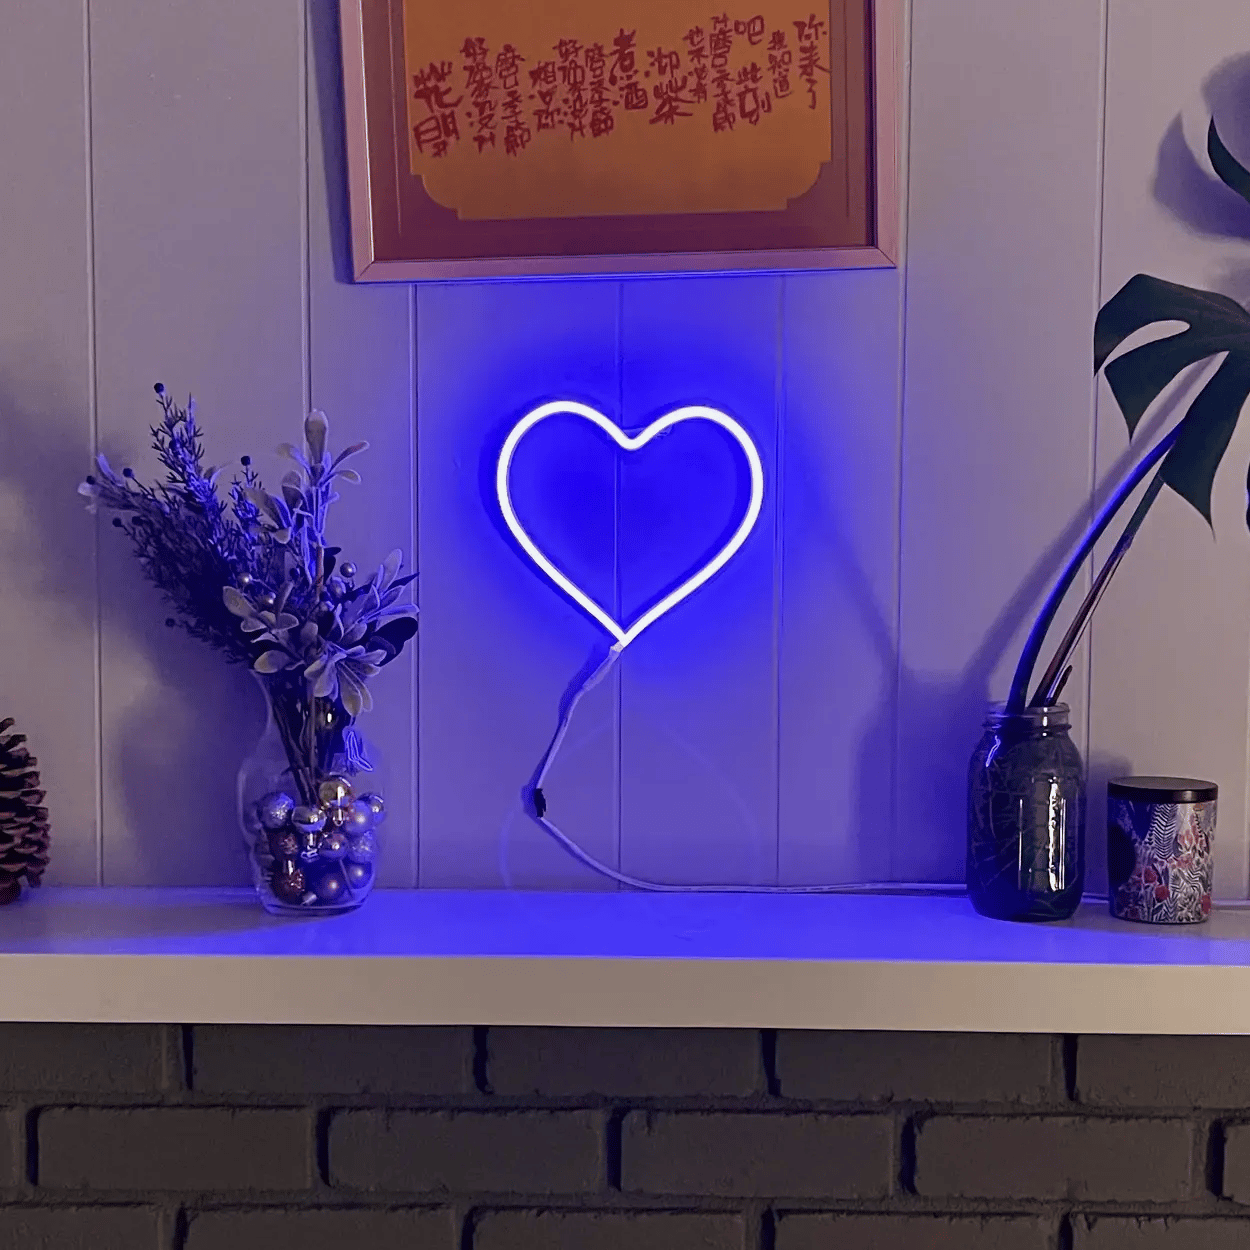 Animated neon heart sign changing between colors